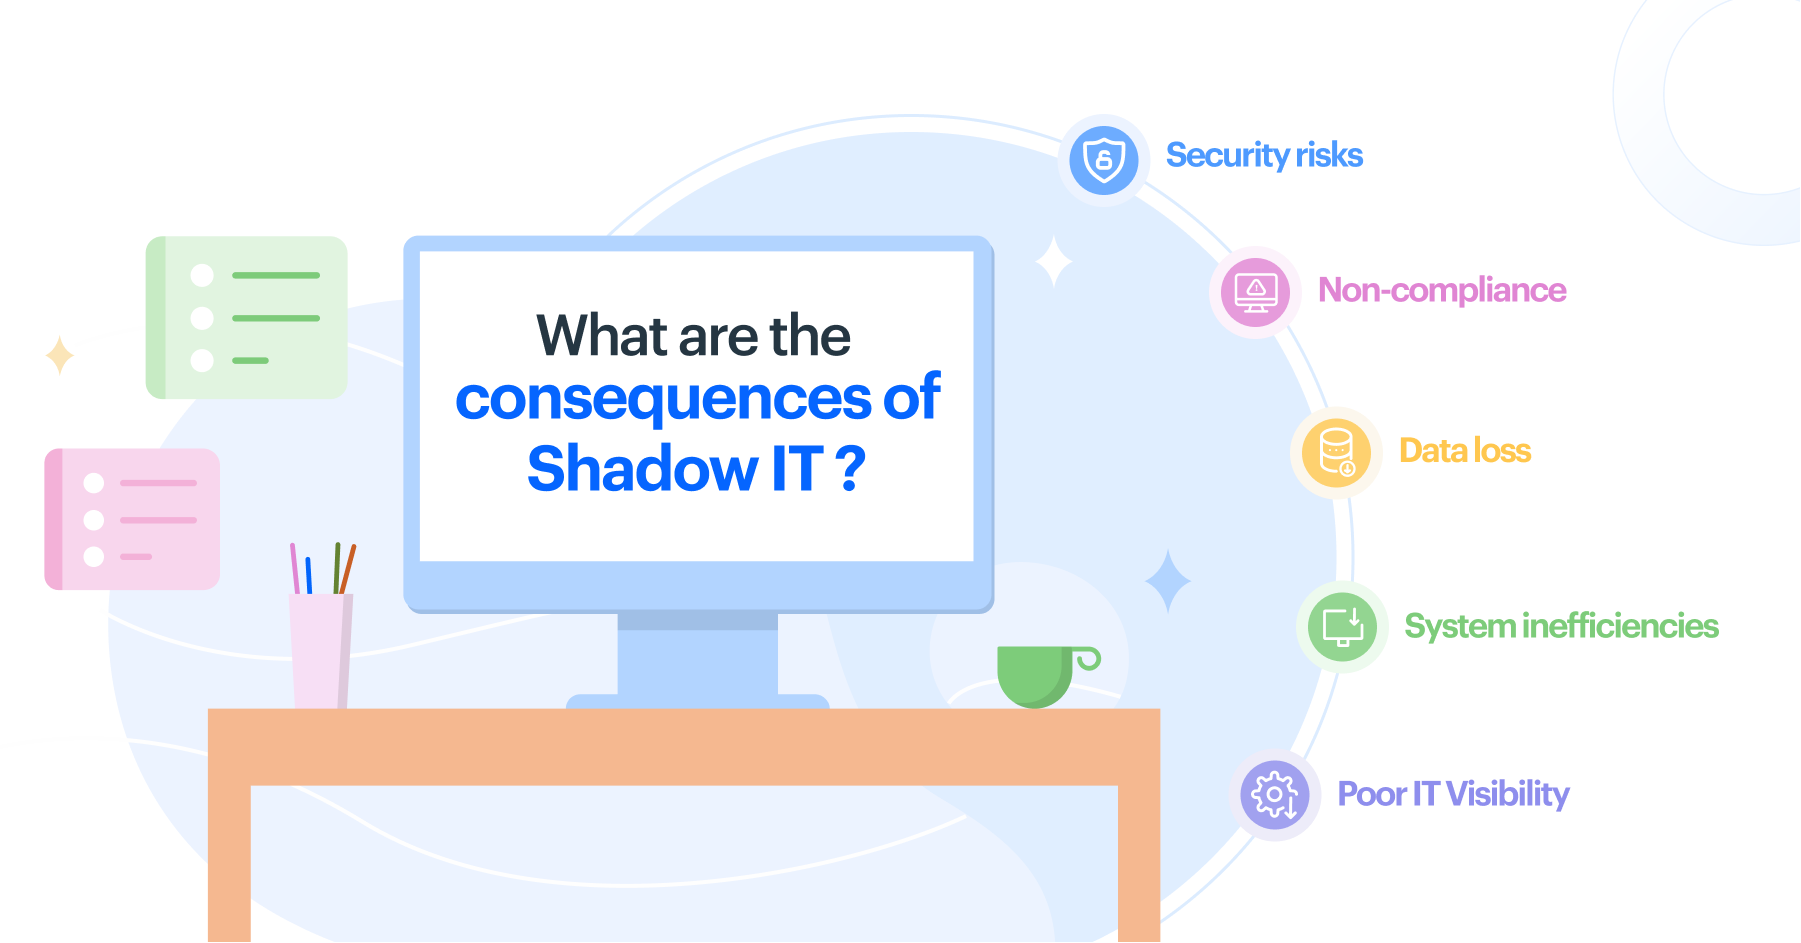 Risks-and-consequences-of-shadow-IT